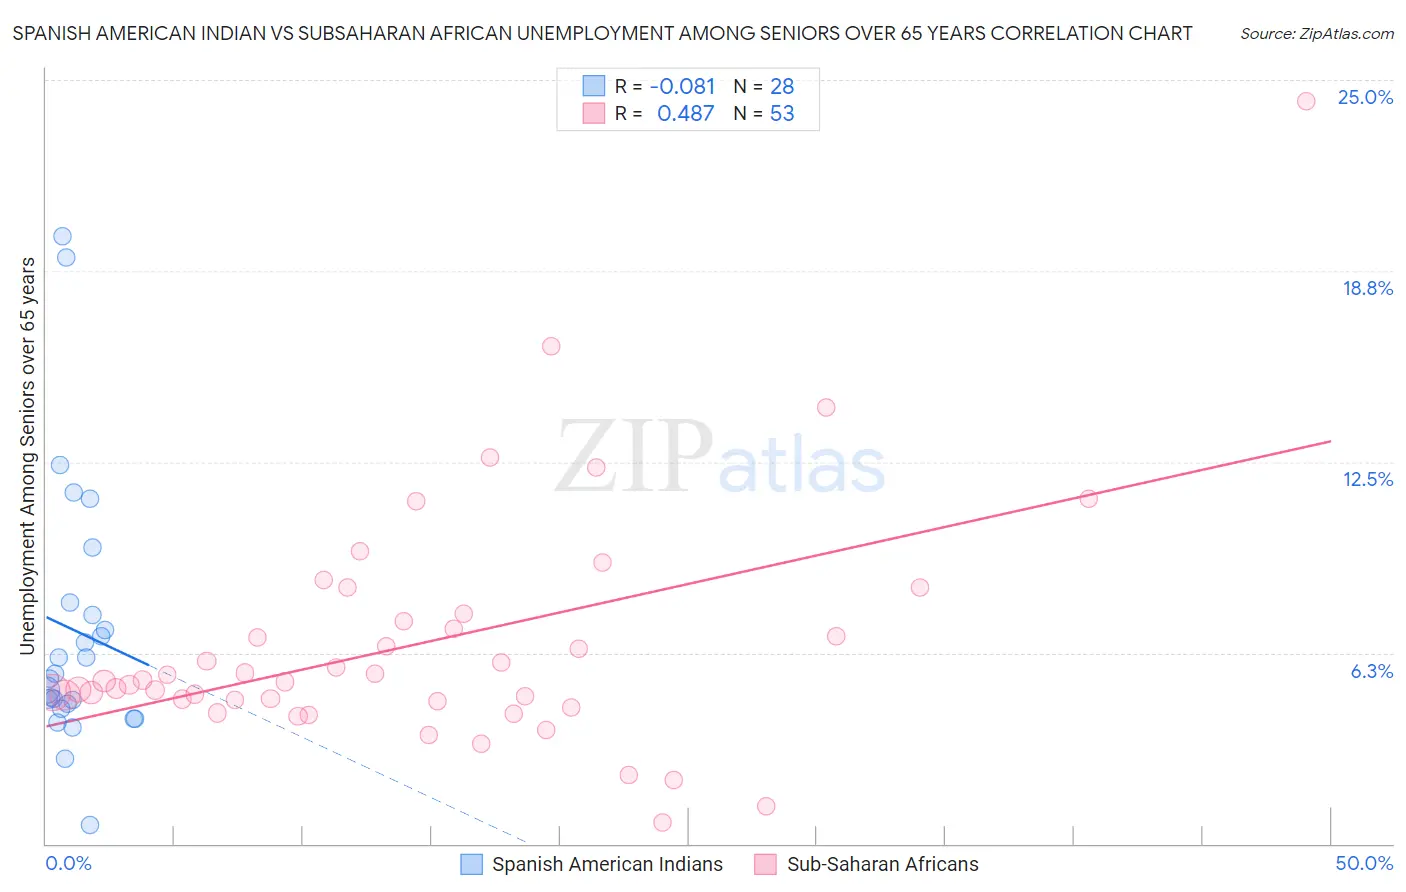 Spanish American Indian vs Subsaharan African Unemployment Among Seniors over 65 years